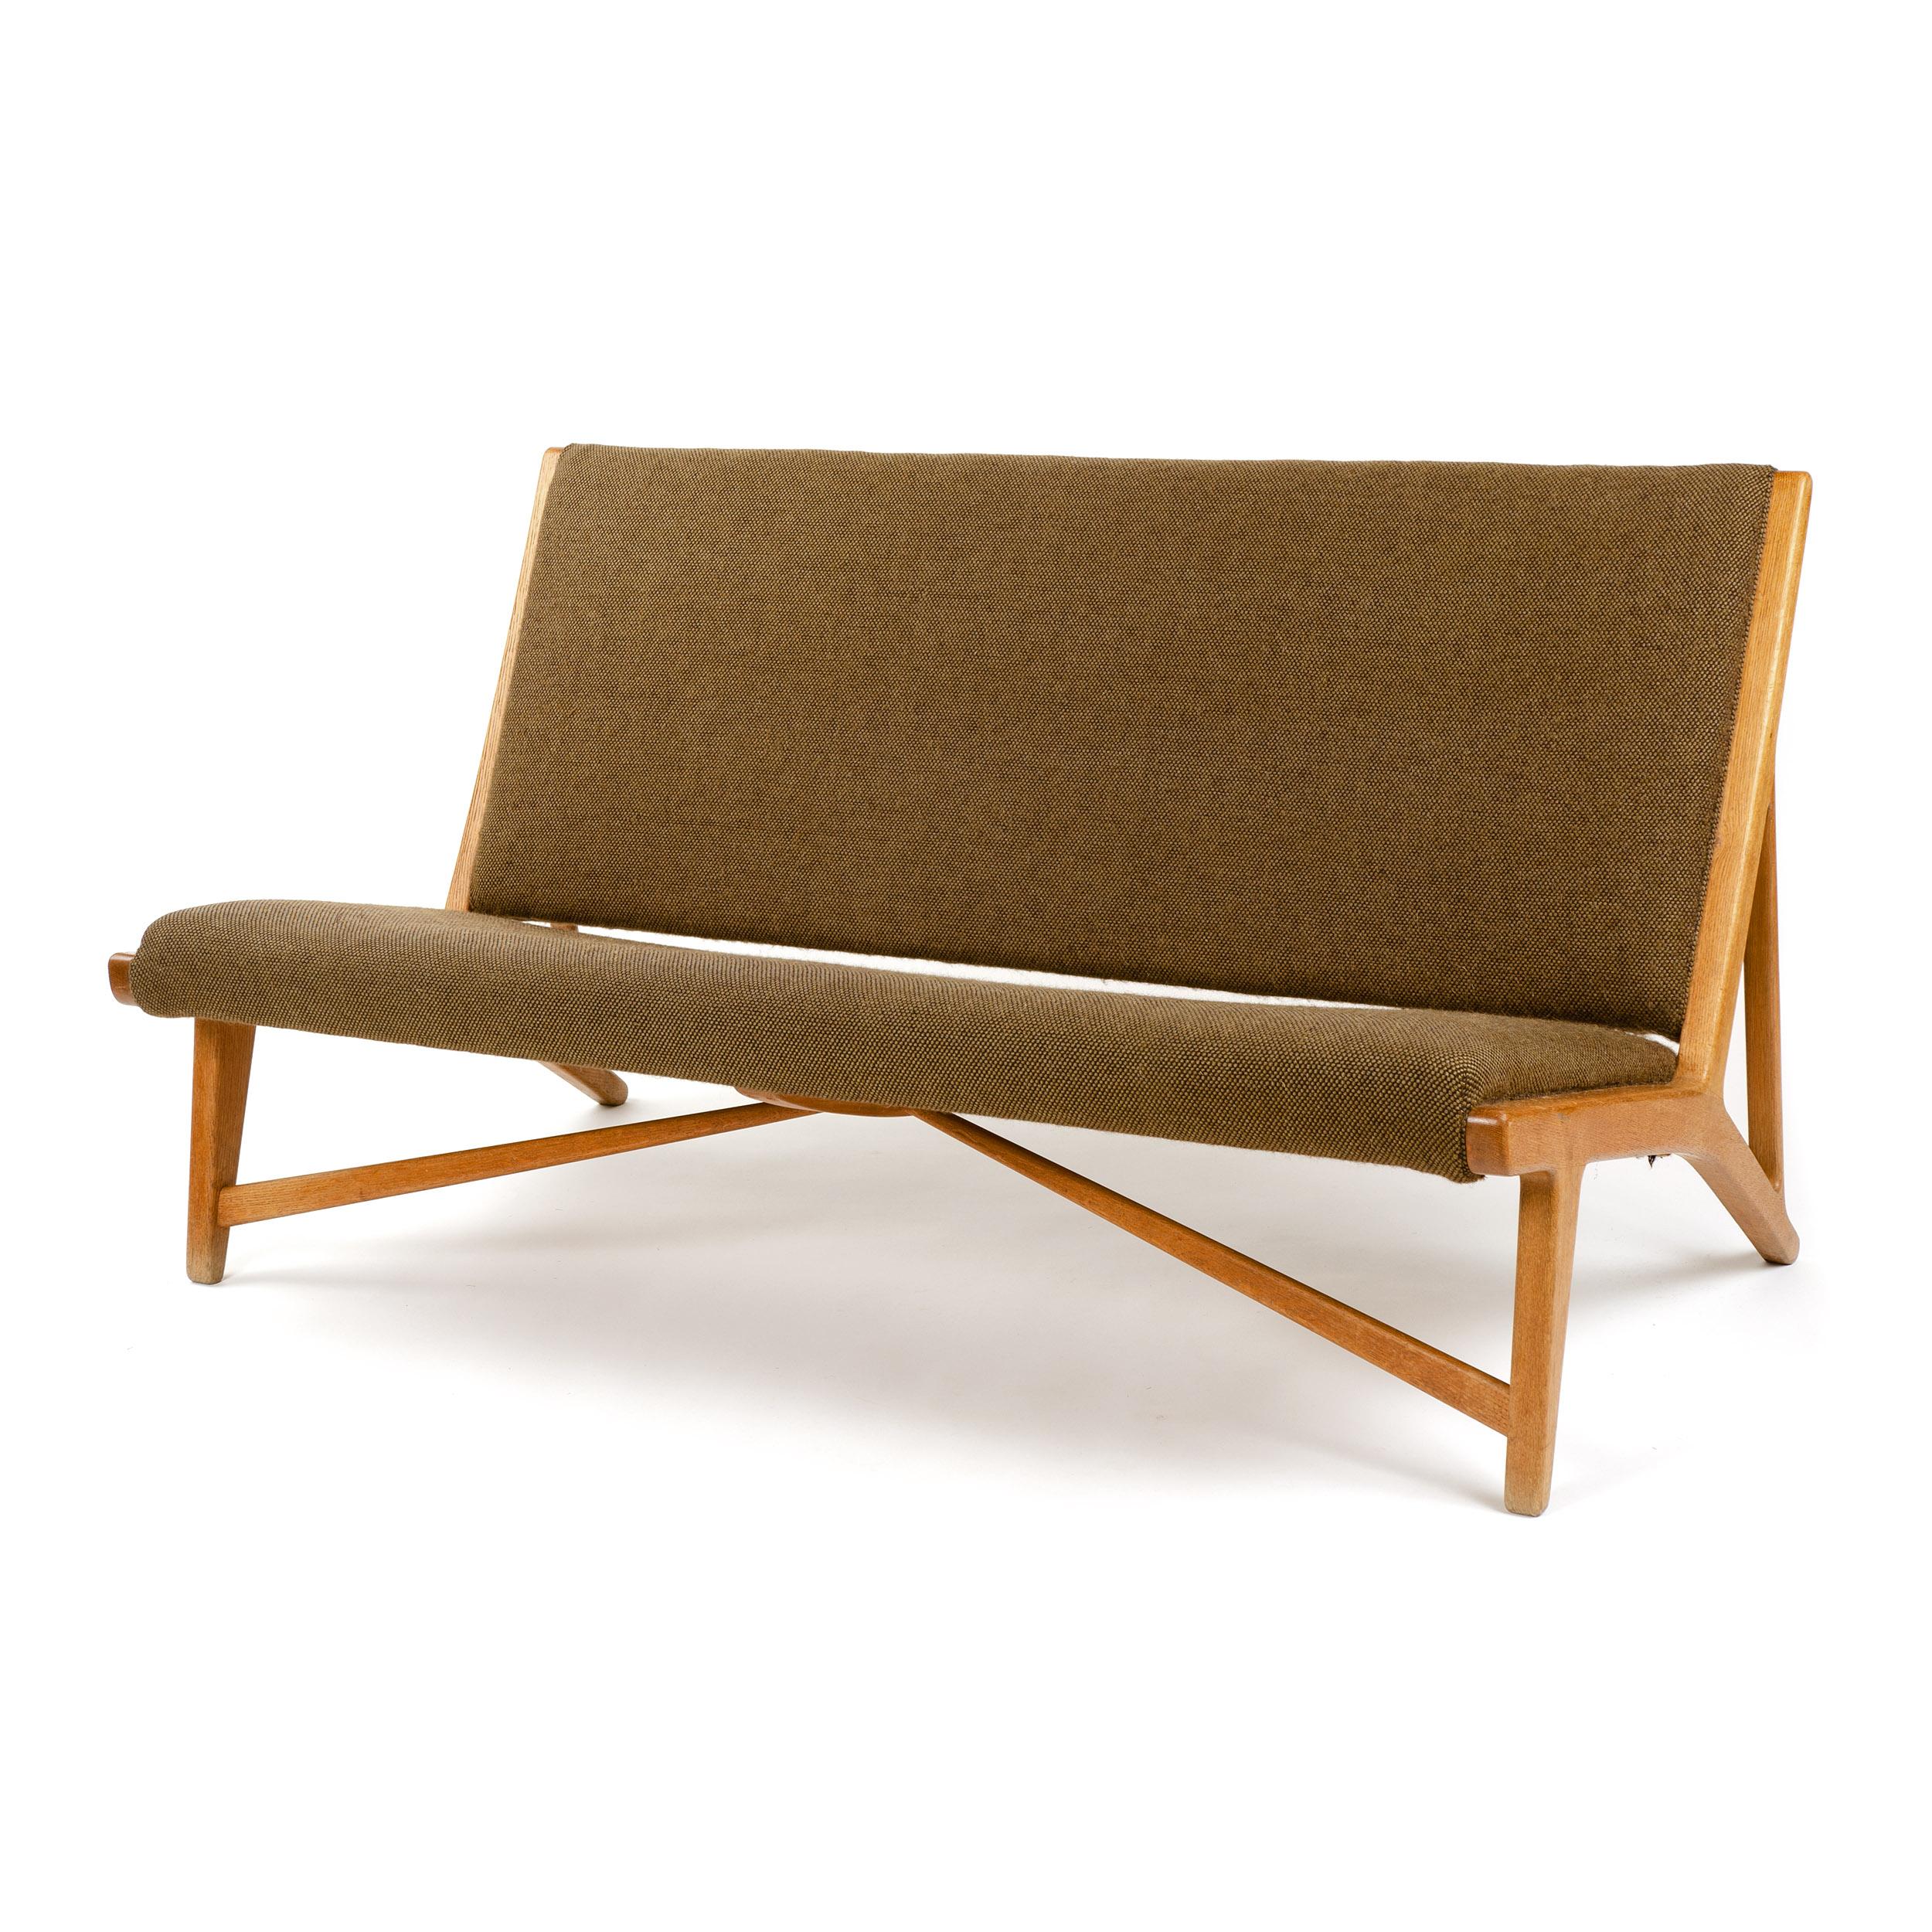 An oak bench, settee or sofa with diagonal tapered leg trusses, retaining the original green/brown wool upholstery. Designed by Hans Wegner circa 1949, manufactured by Johannes Hansen in Denmark, circa 1950s. 

Model JH-555.
 